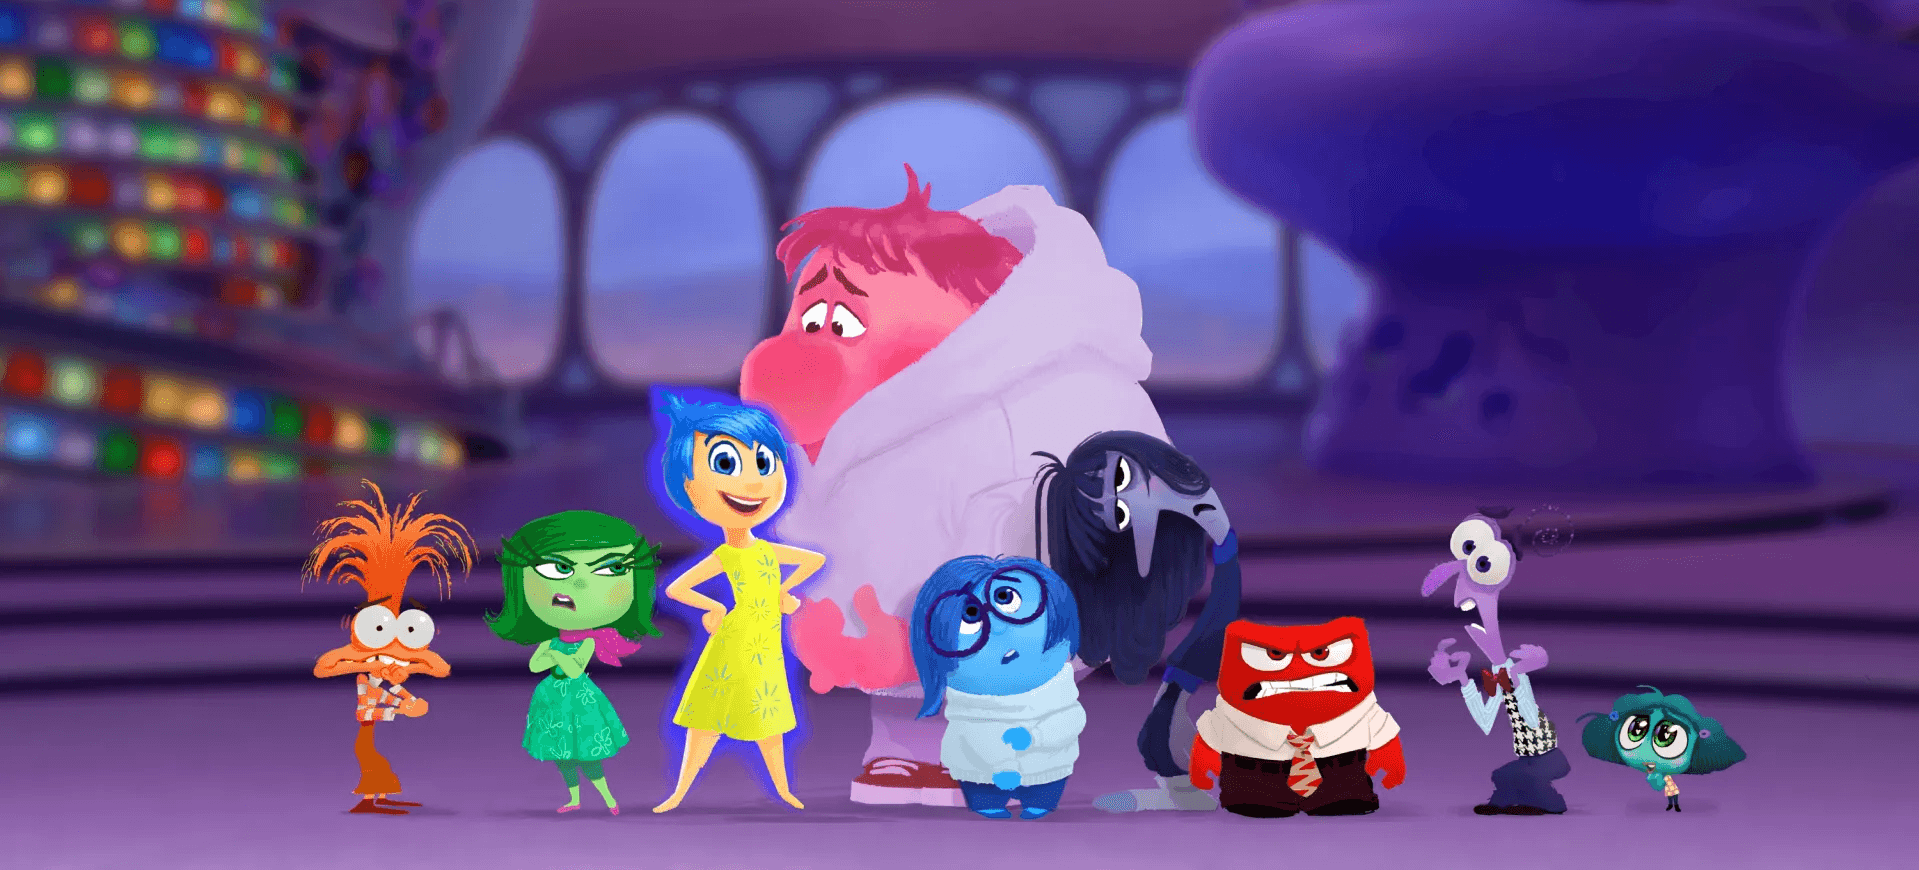 Inside Out 2 from a Therapist’s Perspective:  A Look at Teen Brain Development and Emotions